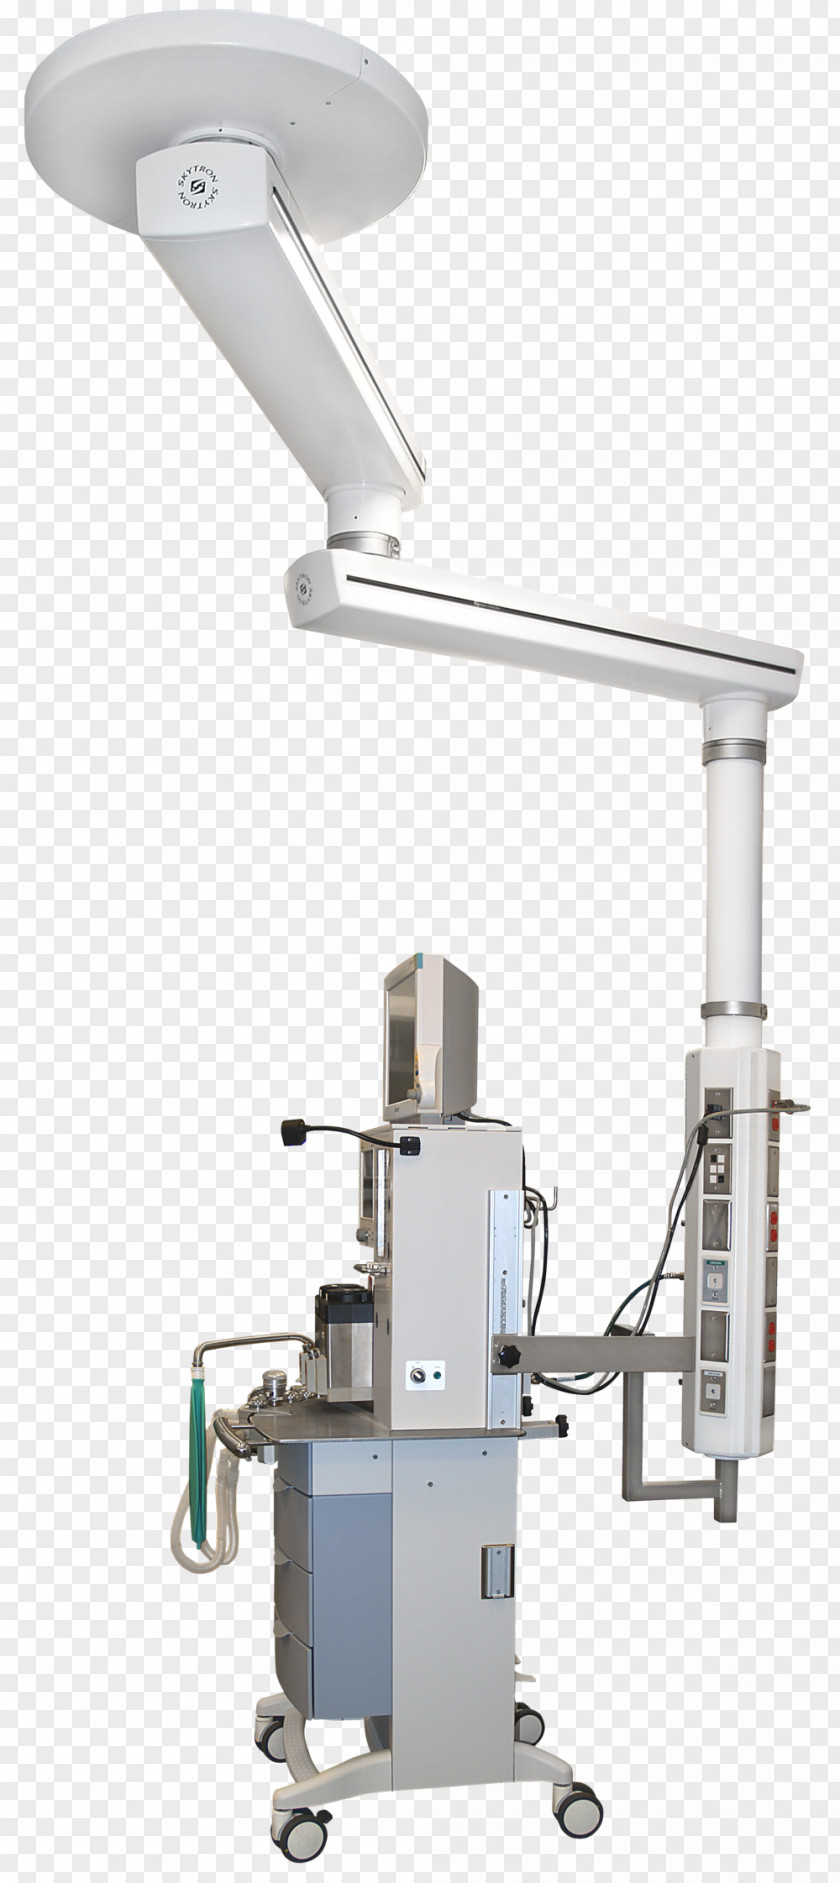 Anesthetic Anesthesia Anaesthetic Machine Medical Equipment Intensive Care Unit Cath Lab PNG